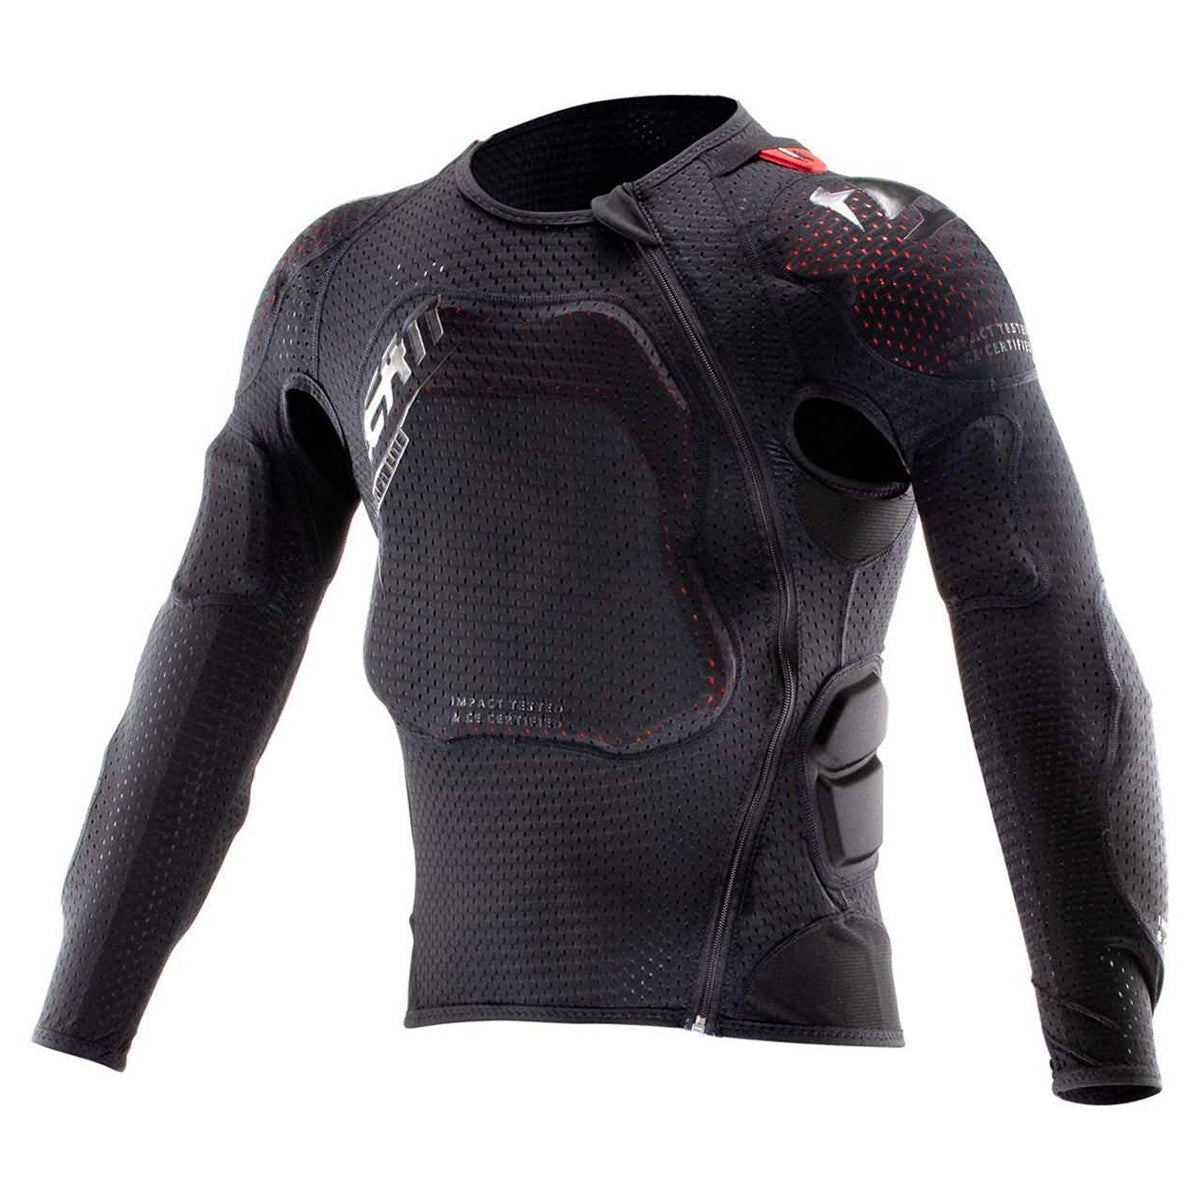 Leatt 3DF AirFit Lite Protector Youth Off-Road Body Armor